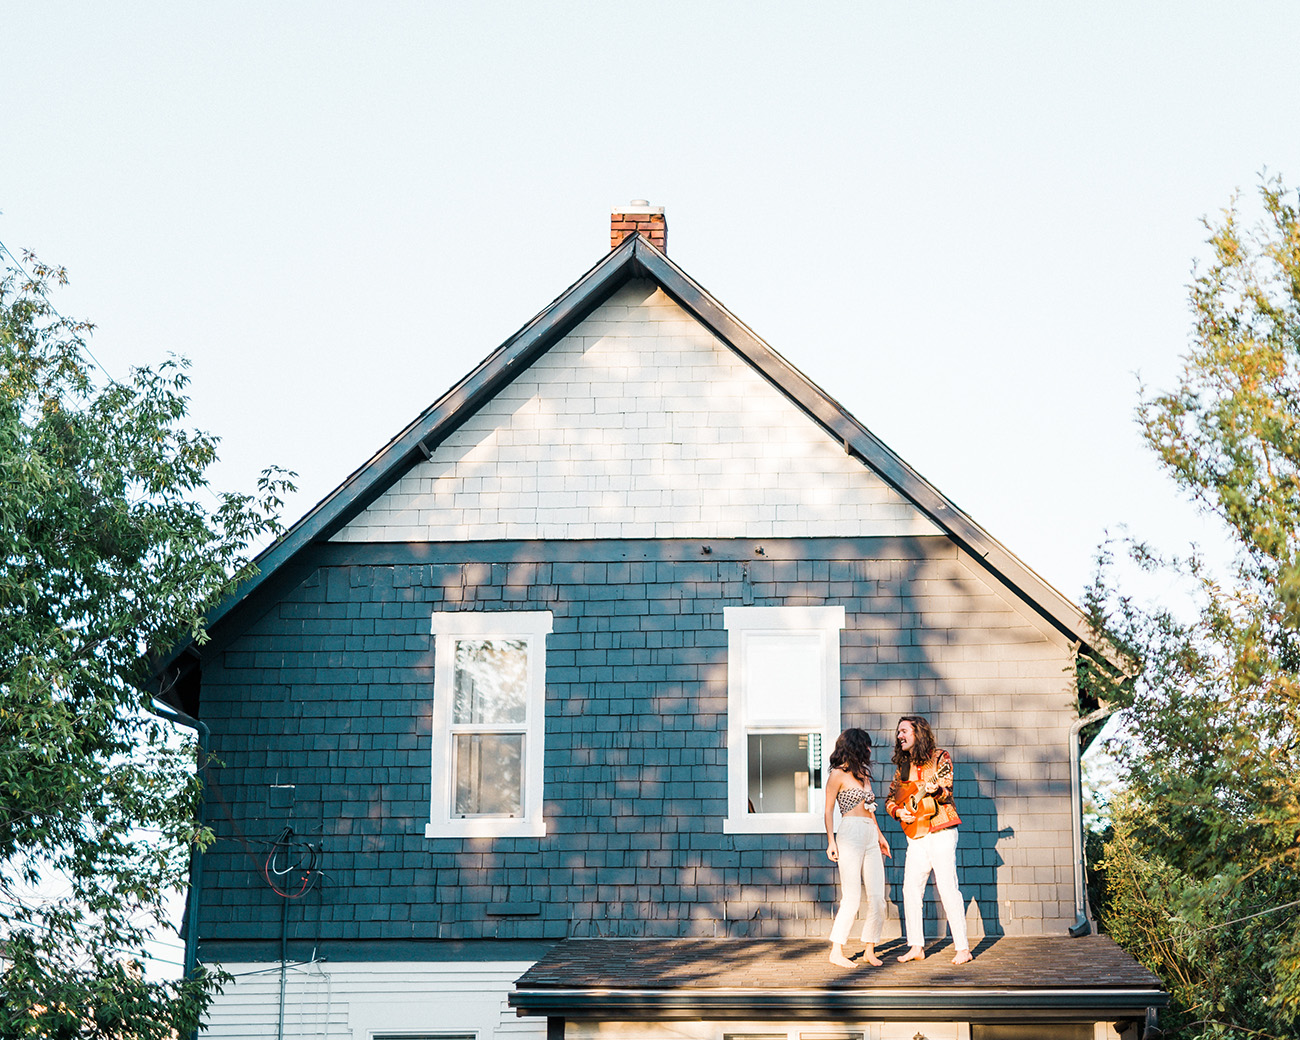 Couple Dancing on their Roof